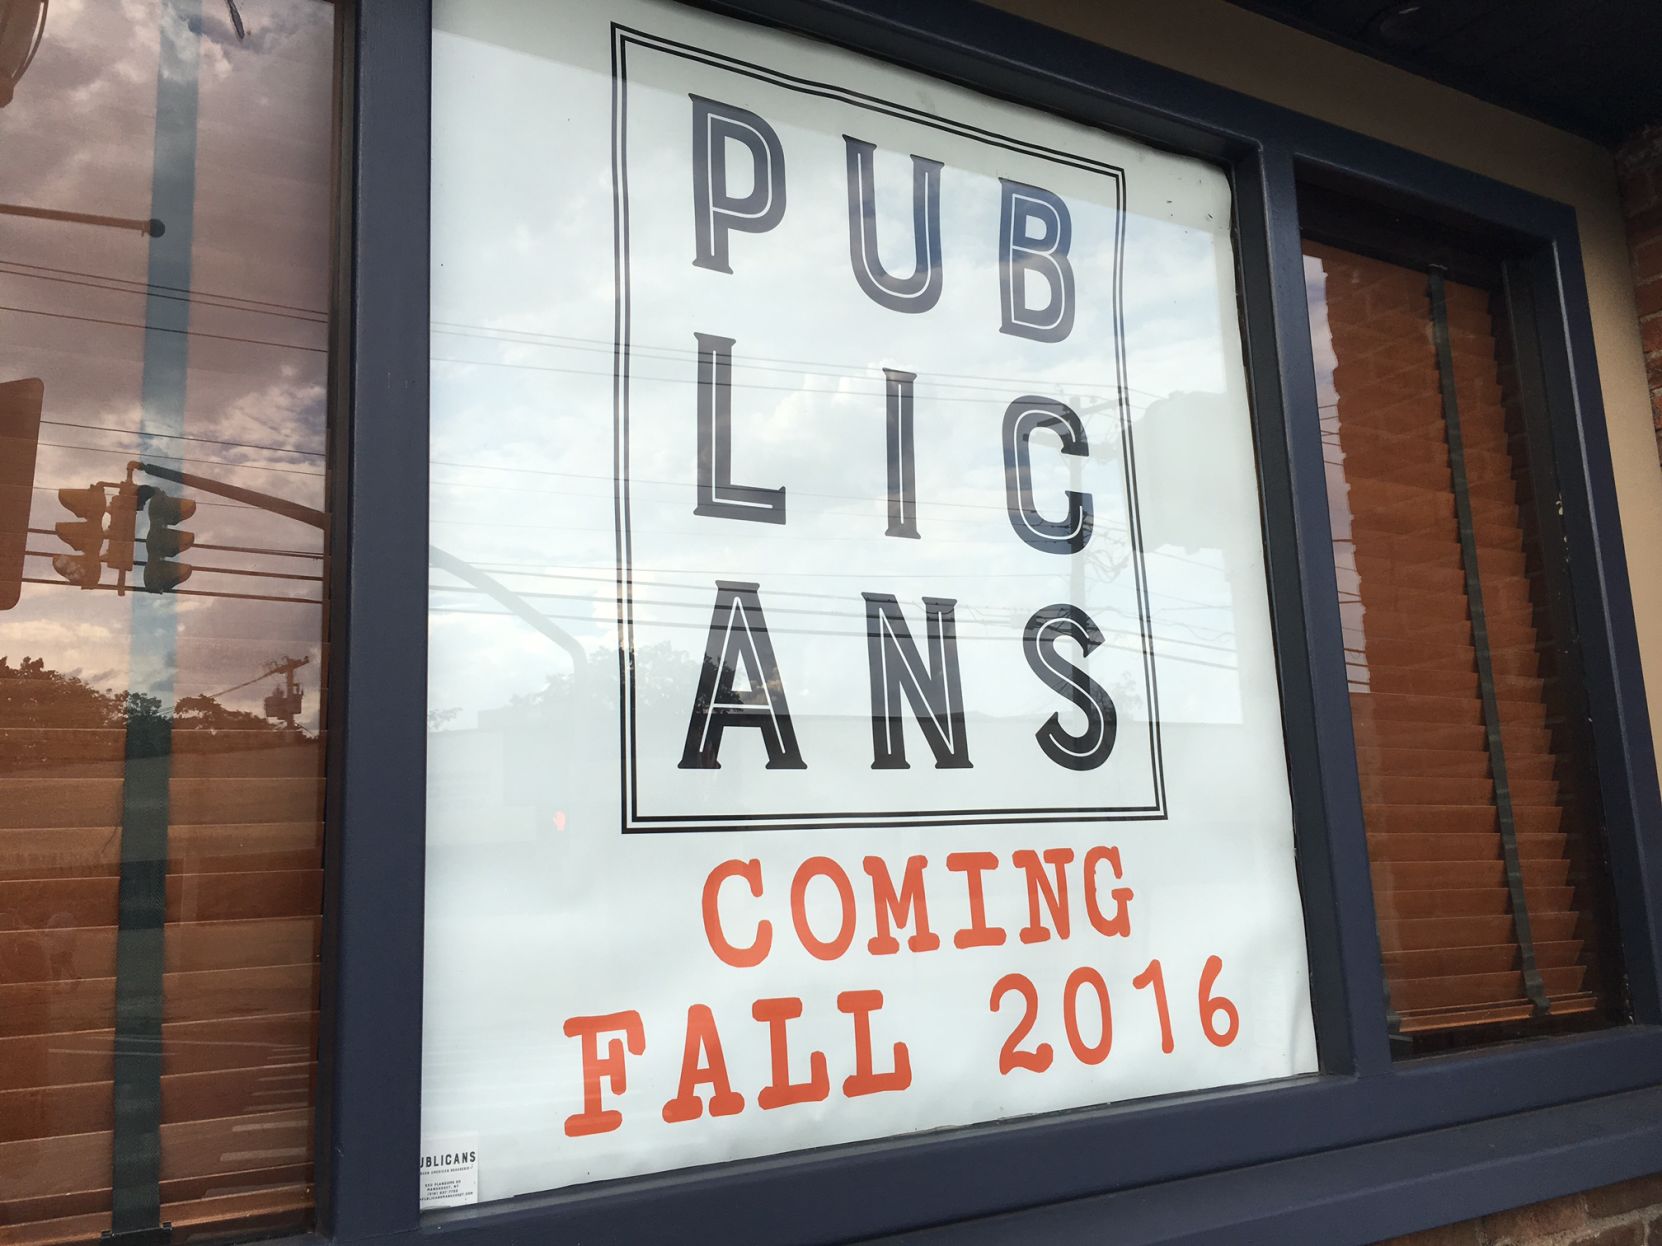 Publicans owners tap into bar’s past